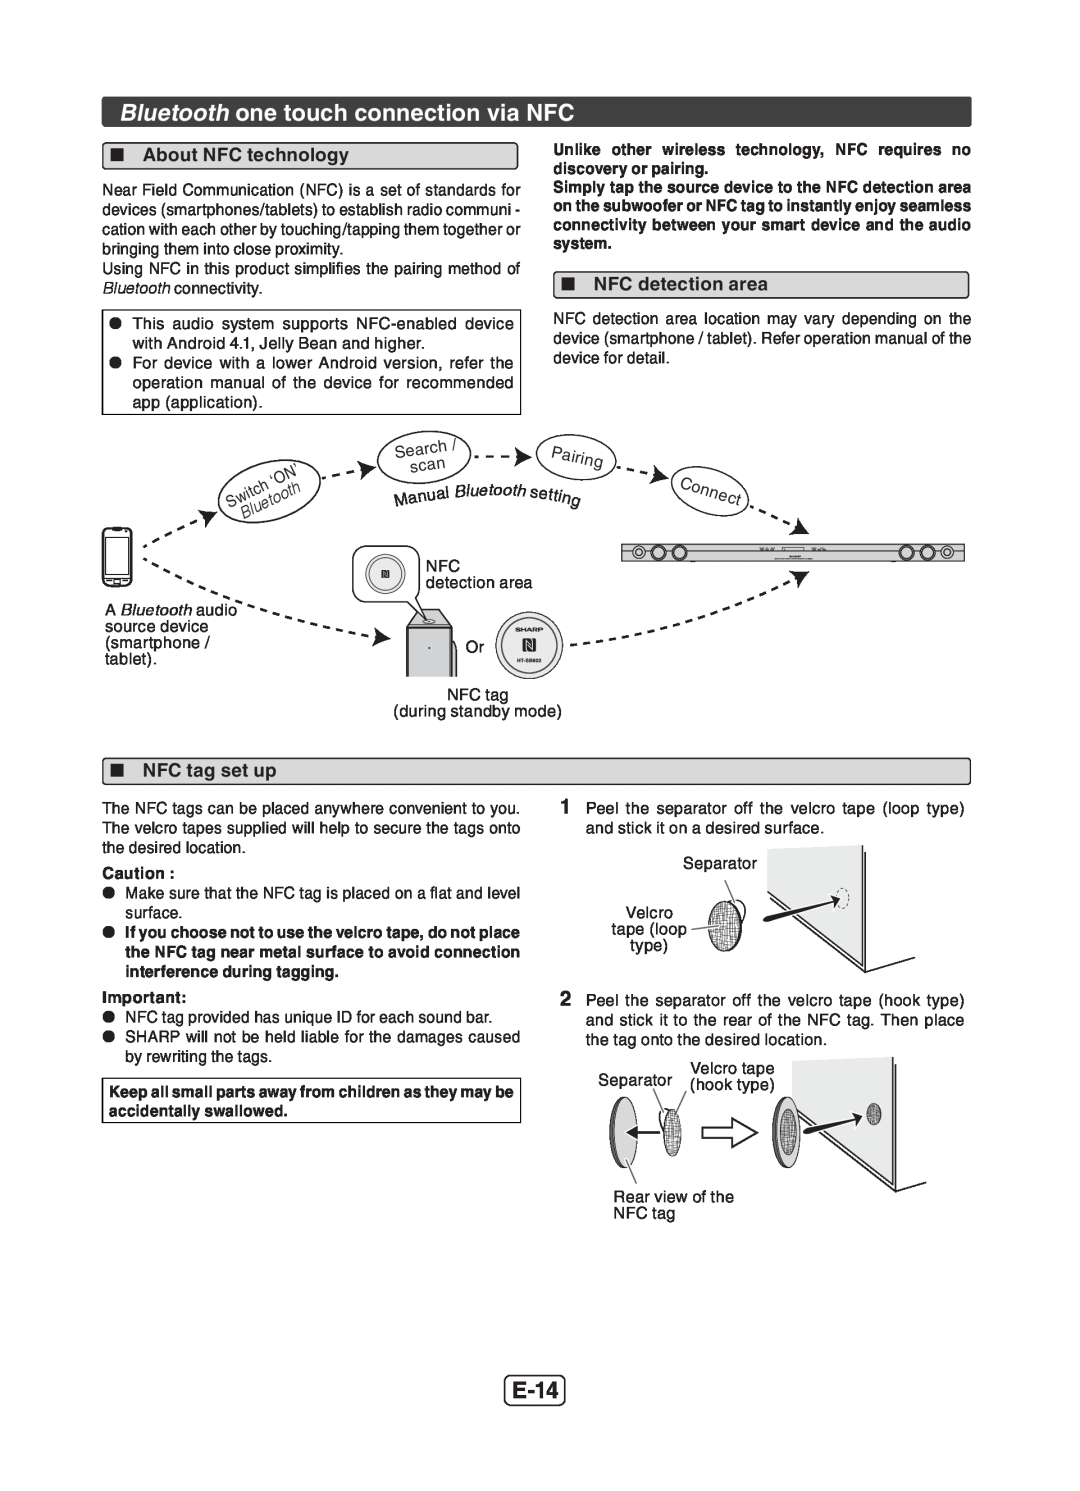 Sharp HT-SB602 operation manual Bluetooth one touch connection via NFC, E-14, Connect, l Blu, tooth s 